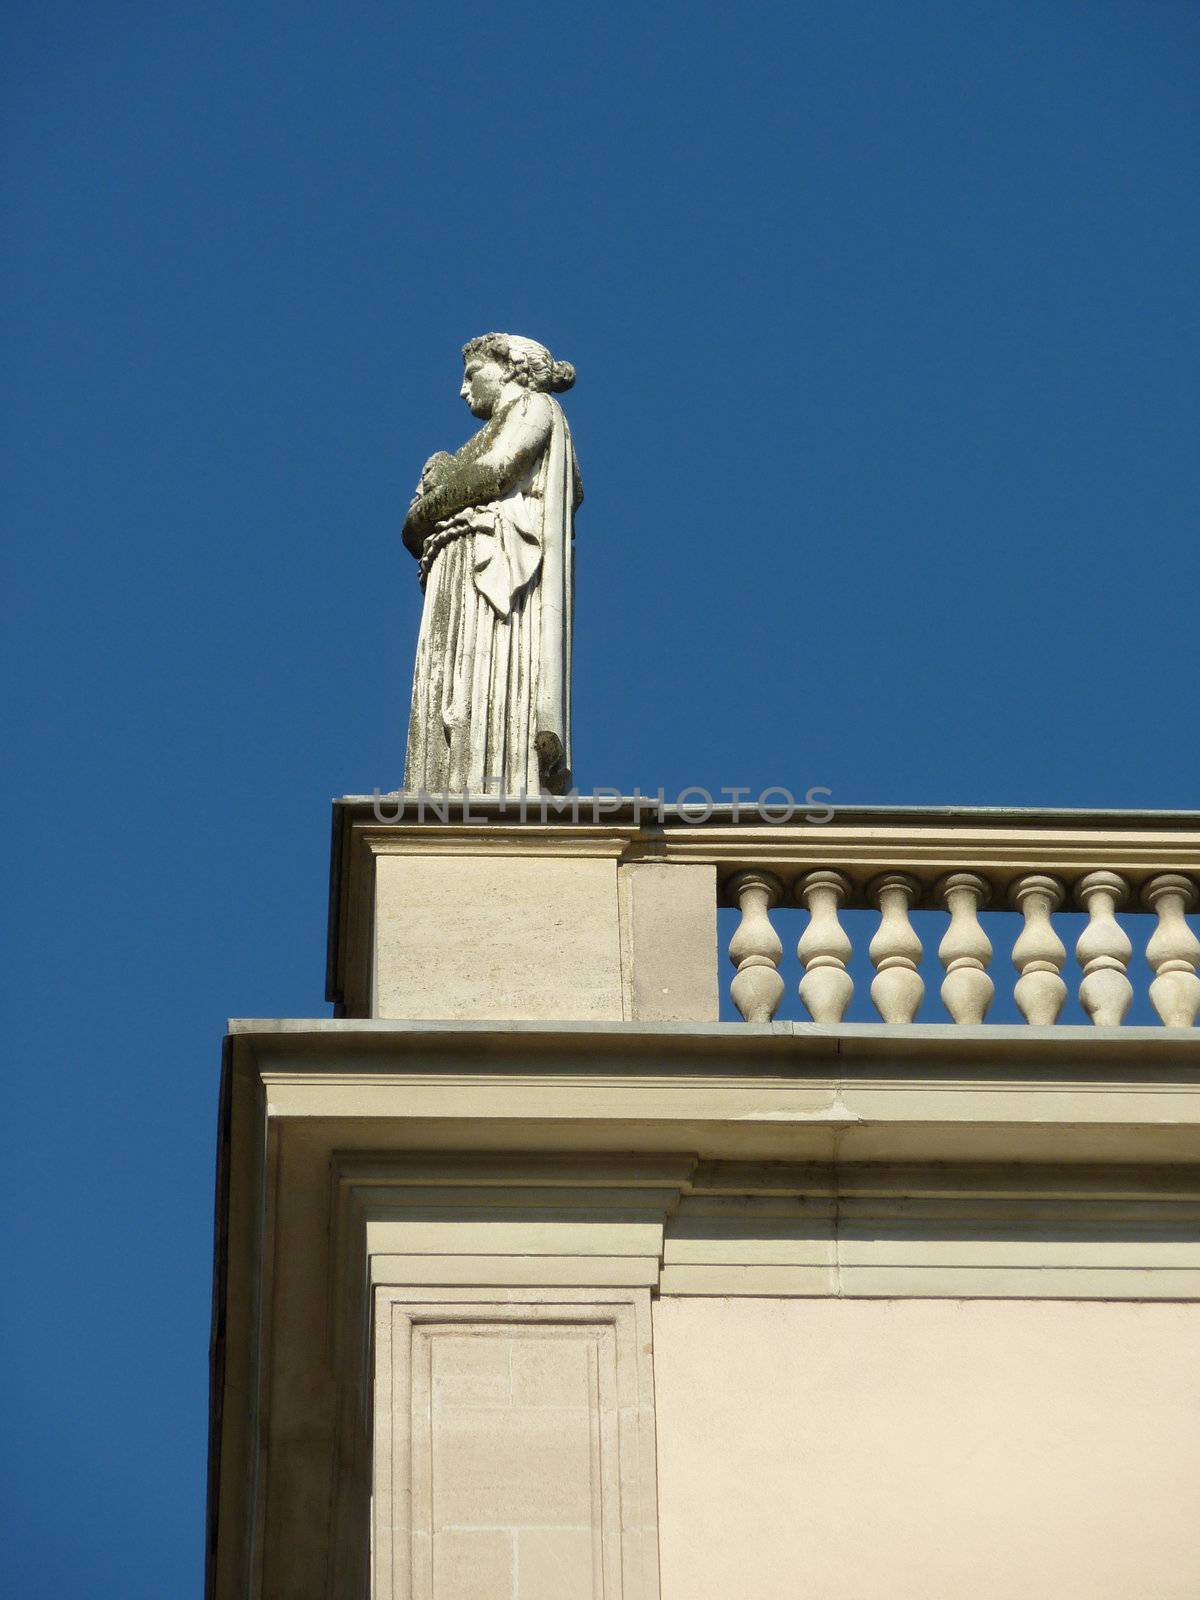 White statue of a woman on a balcony looking on the left